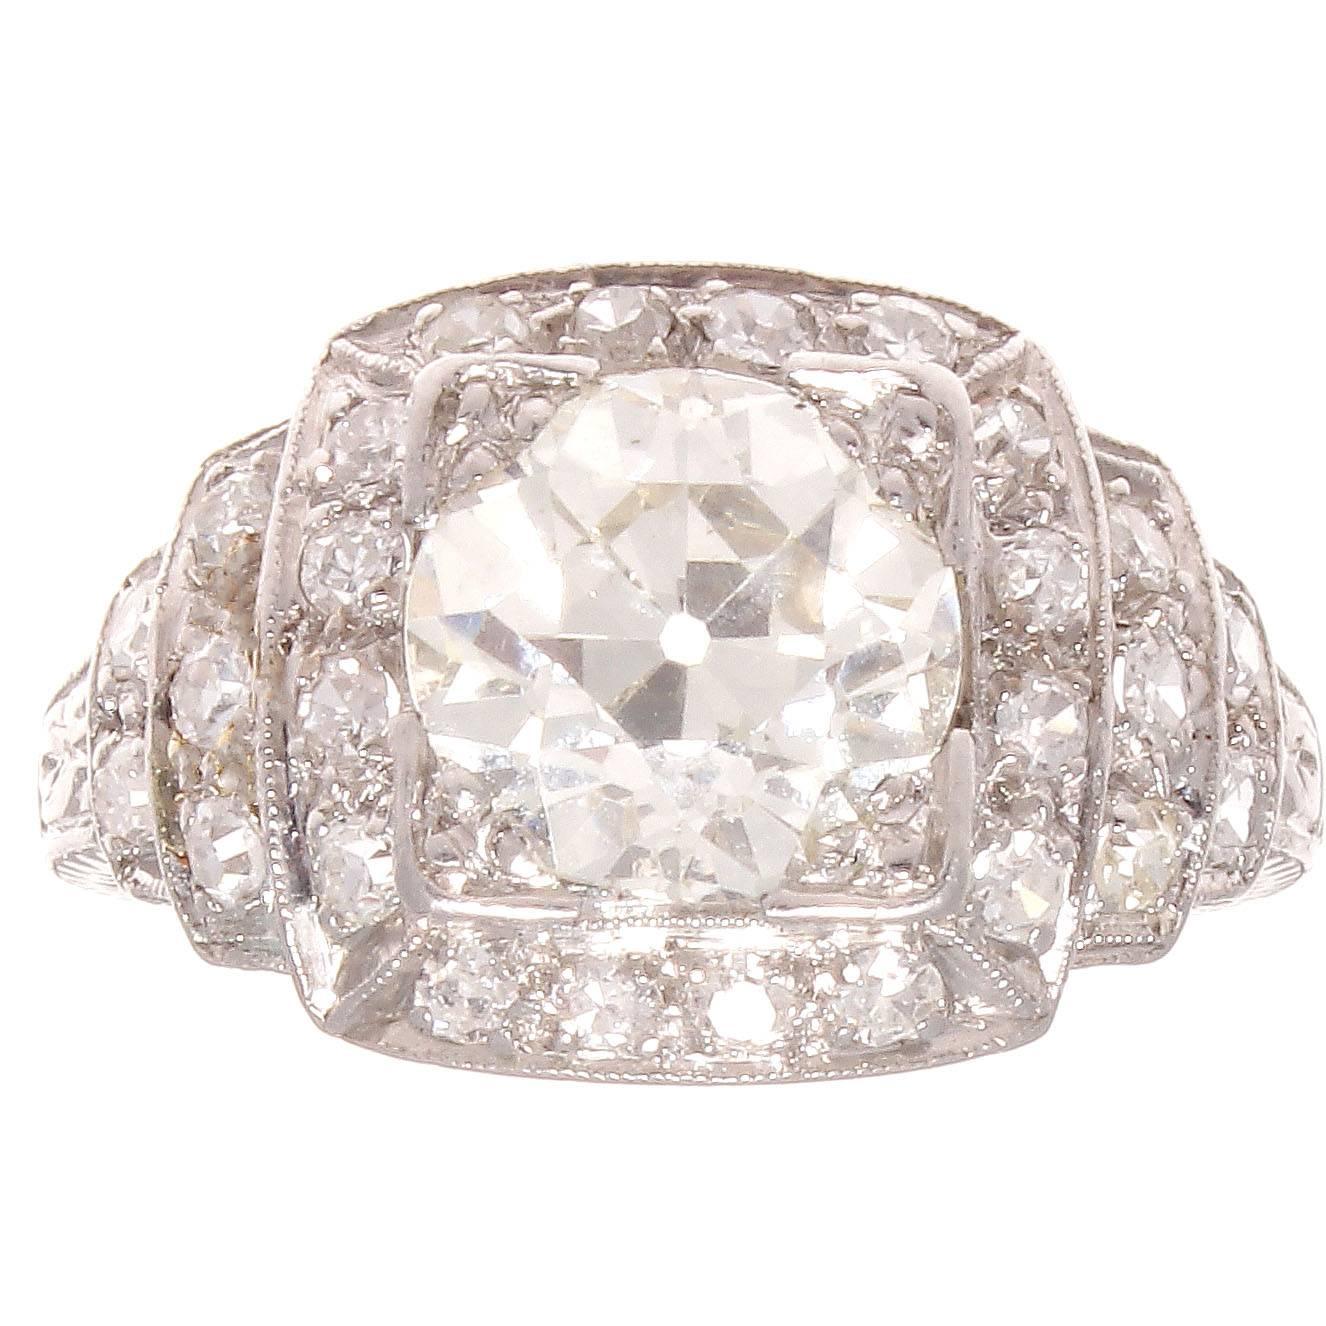 Created as an architectural themed diamond ring. The original art deco design features an old European cut diamond of 1.92 carats and numerous white diamonds as a halo as well as accents. The center diamond is graded as L color and VS clarity. 

The